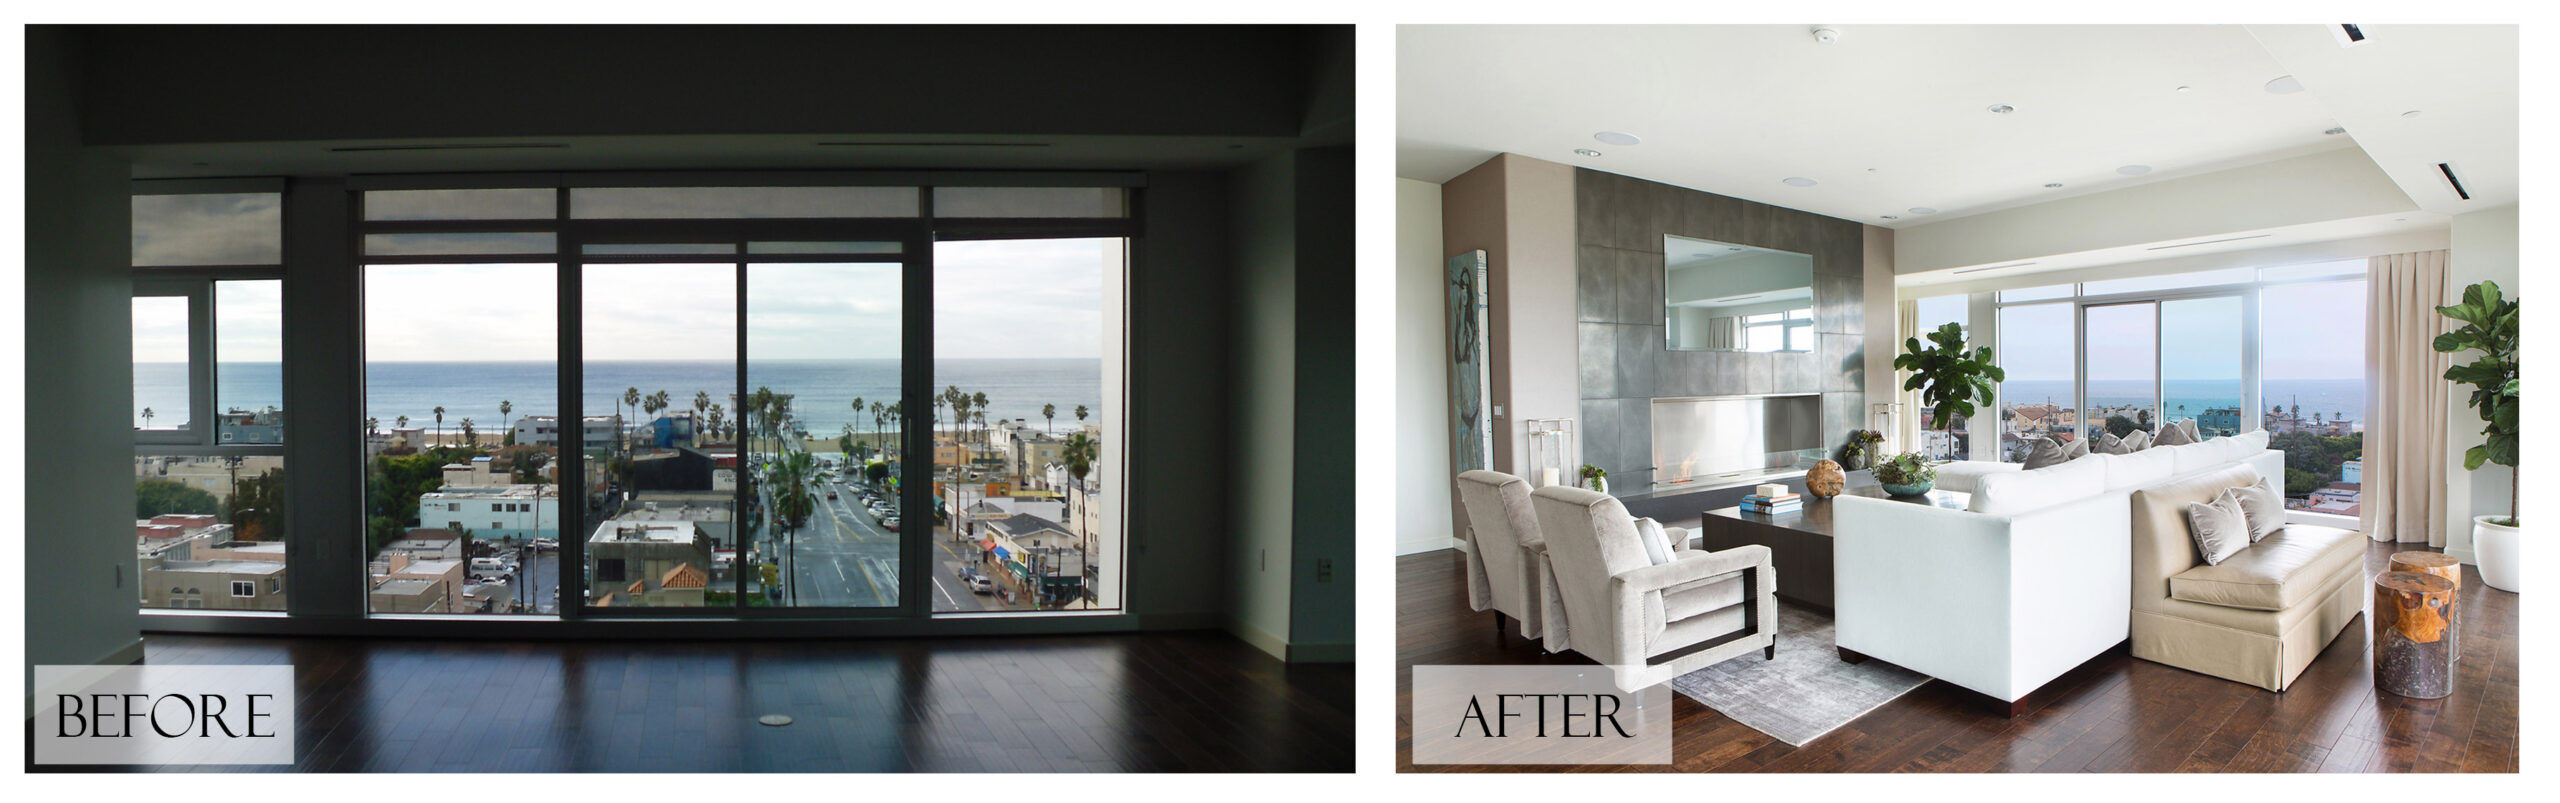 Top San Diego Interior Designer Lori Dennis Inc Before and After